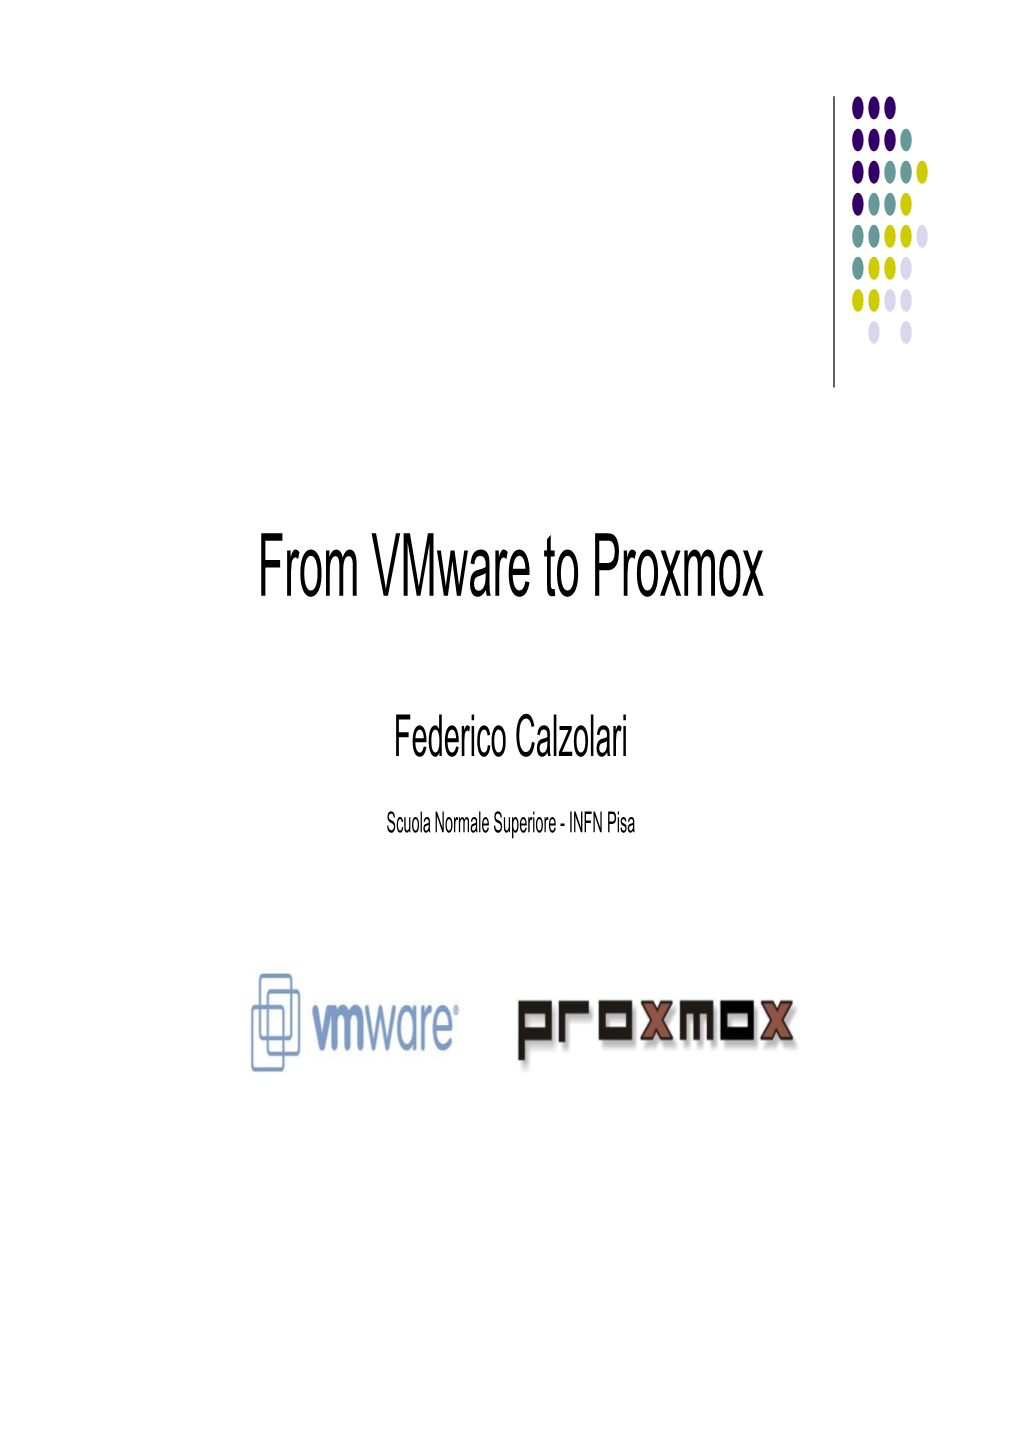 From Vmware to Proxmox